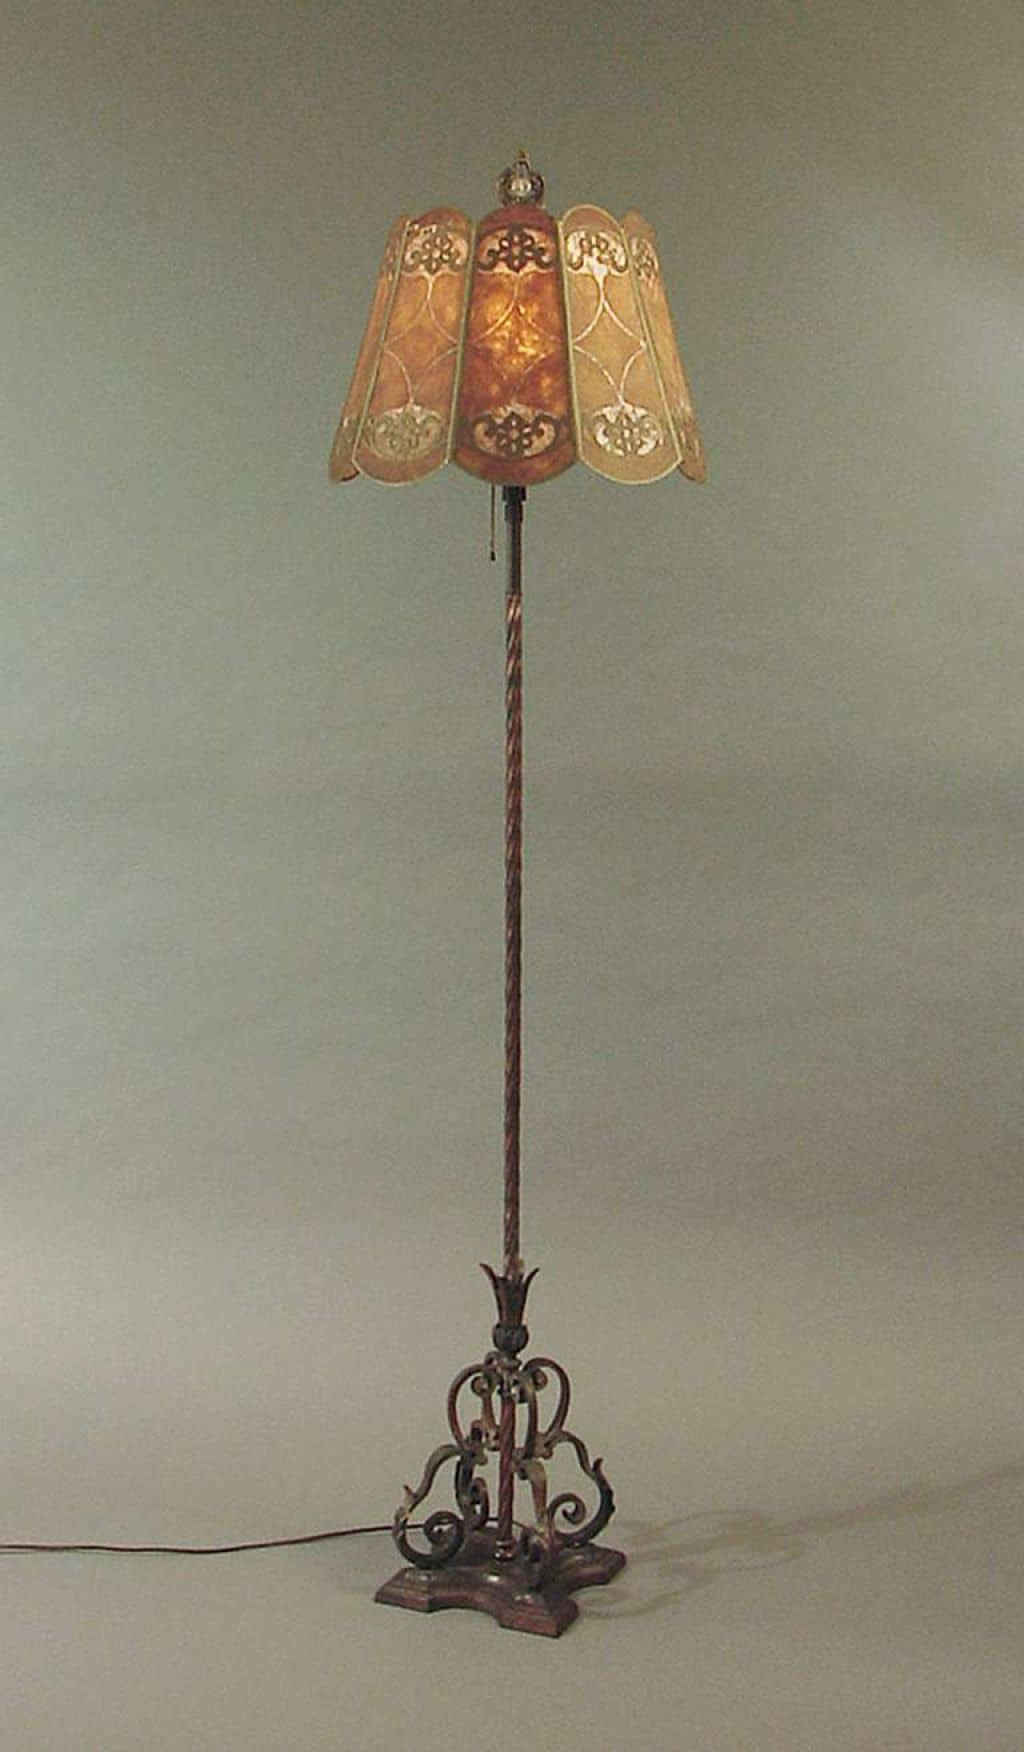 Vintage Style Floor Lamps Fraufleurcom Lights And Lamps intended for size 1024 X 1752